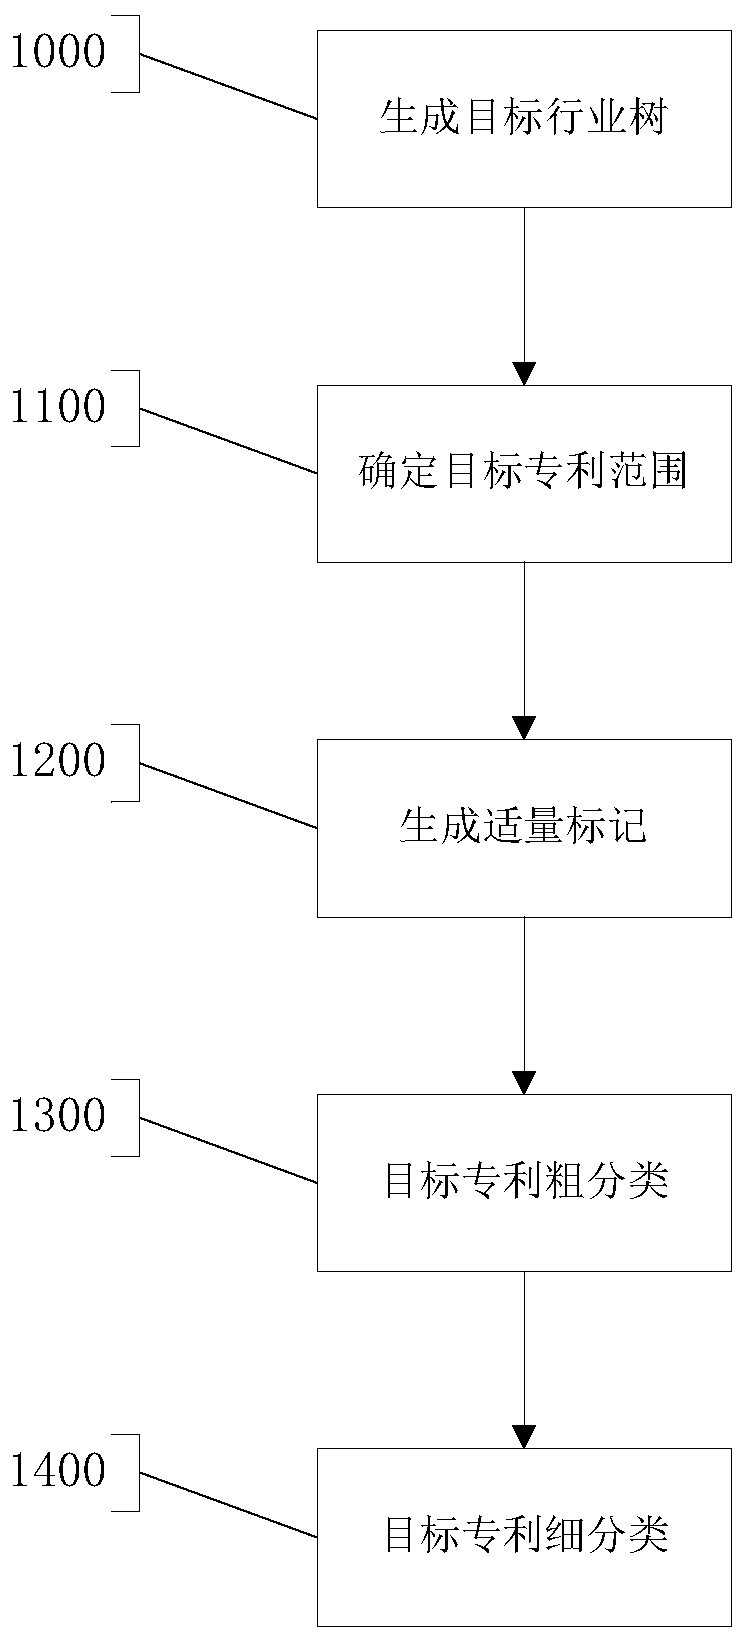 Automatic industry classification method and system